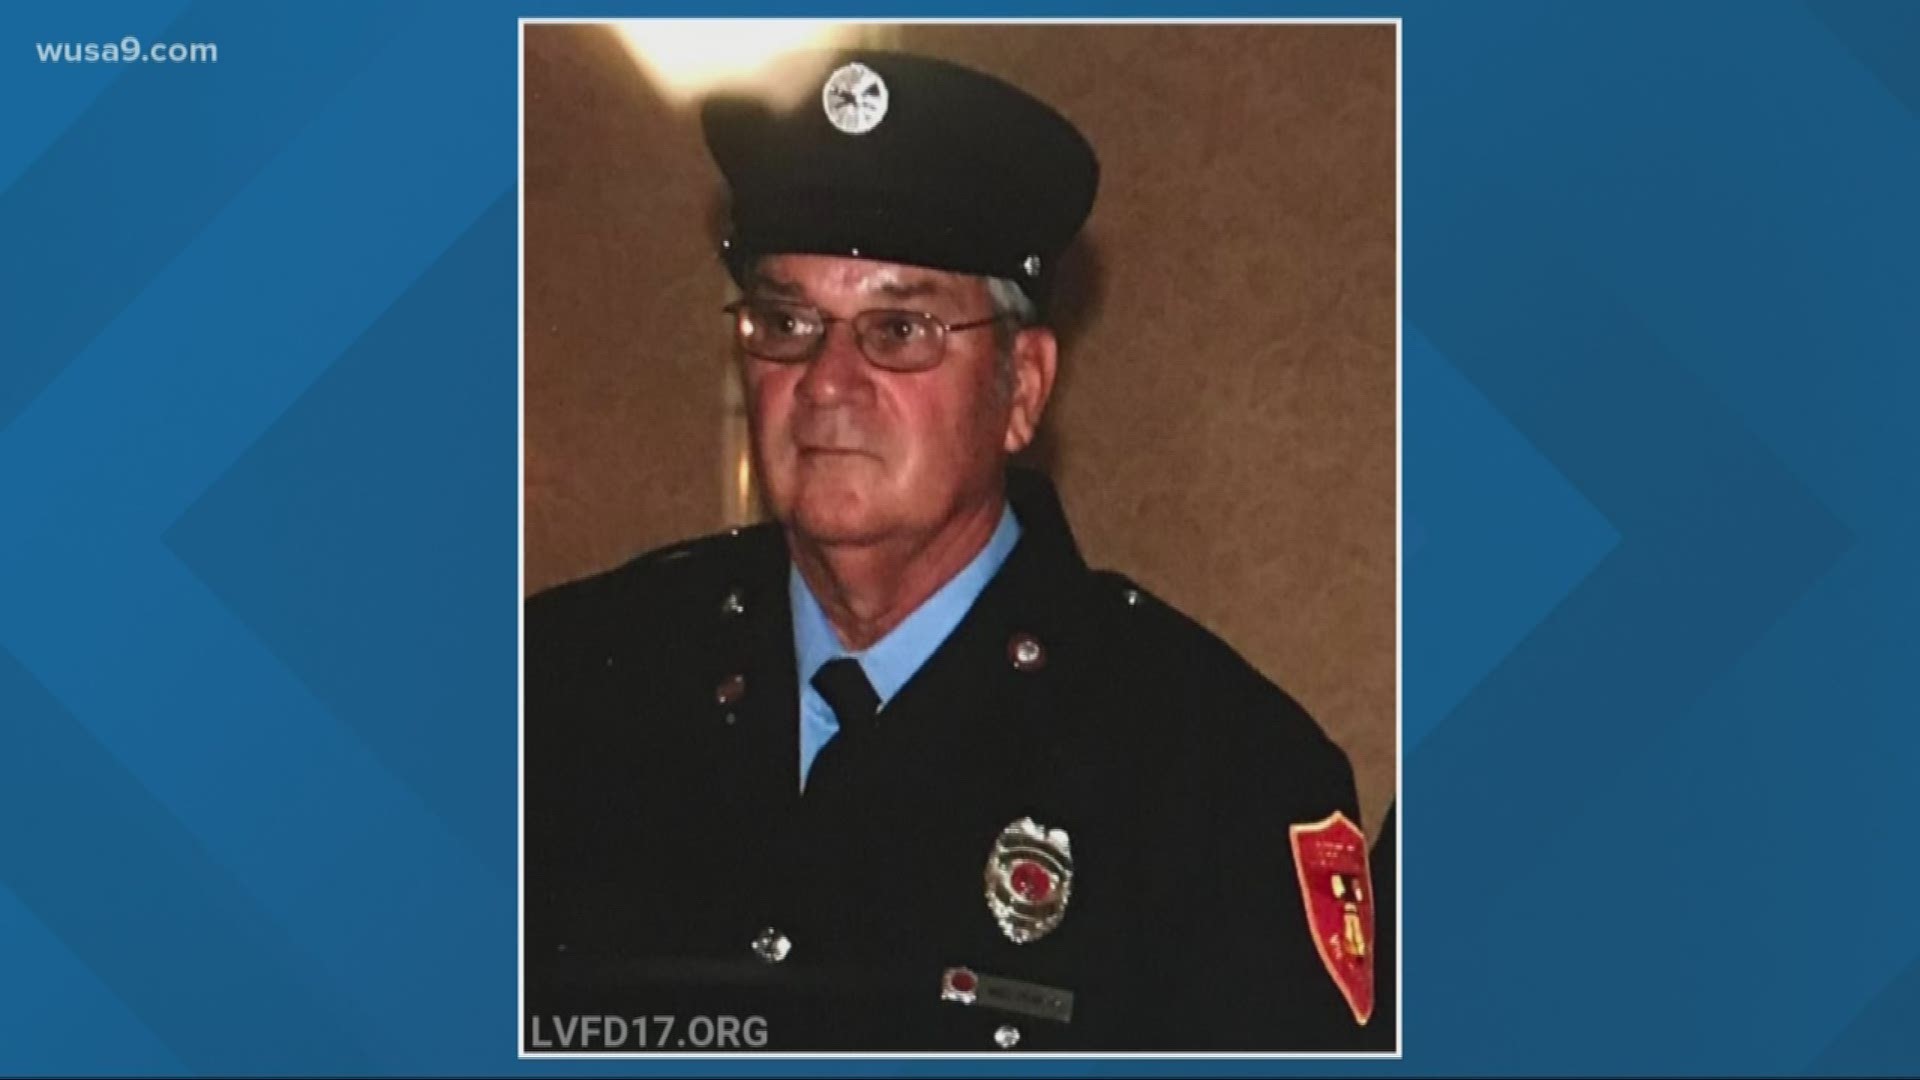 This morning, Maryland Governor Larry Hogan ordered flags to be lowered to half-staff in memory of Firefighter Michael Powers of the Liberty-town Volunteer Fire Department. Powers died in the line of duty yesterday while responding to a car accident.